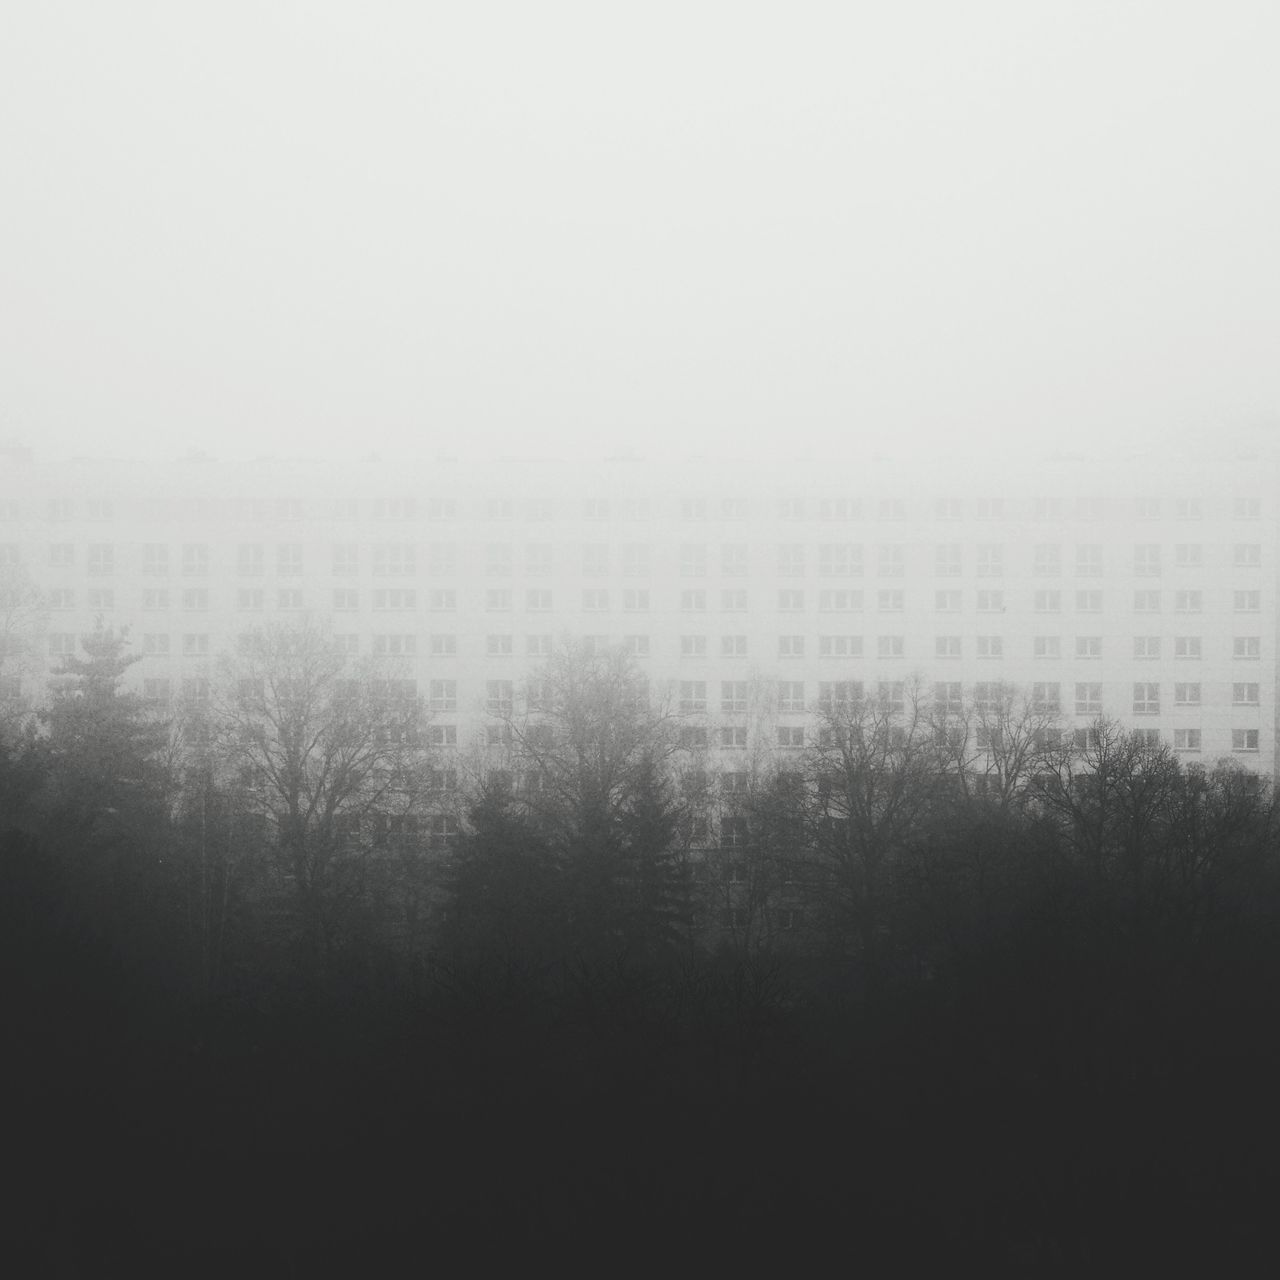 Trees against buildings during foggy weather